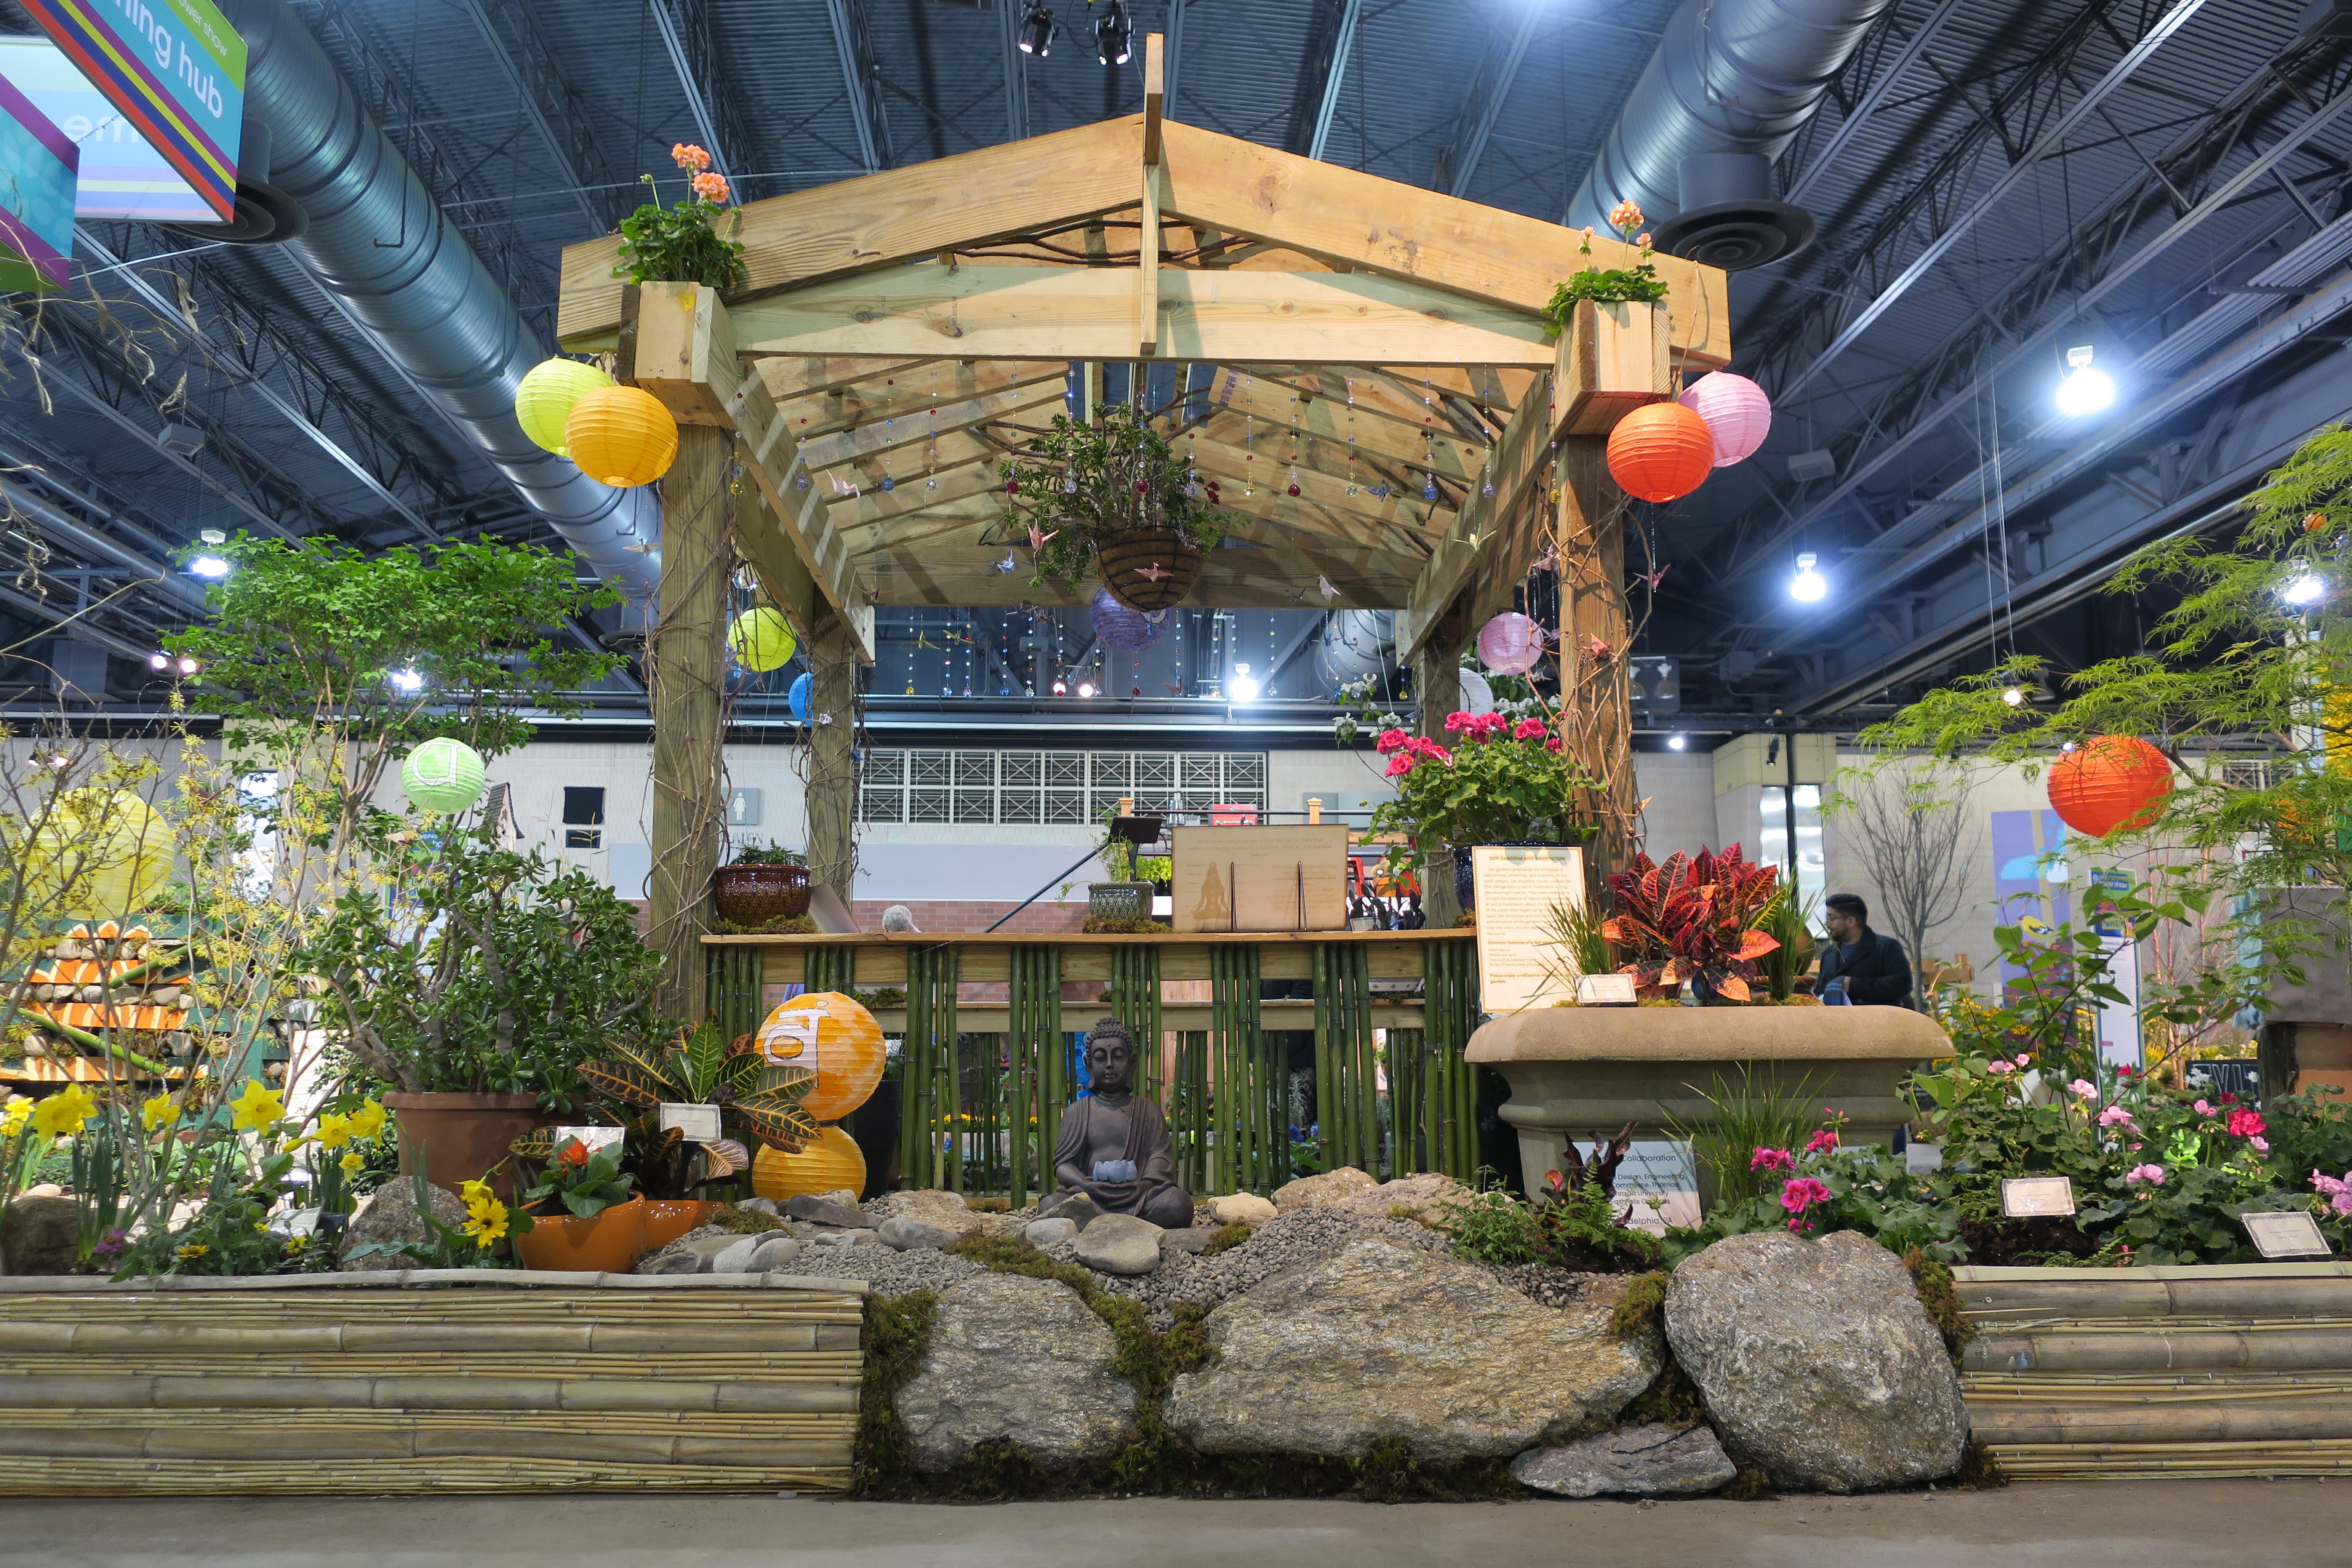 Exhibit created by Jefferson and Saul students at the 2019 Philadelphia Flower Show